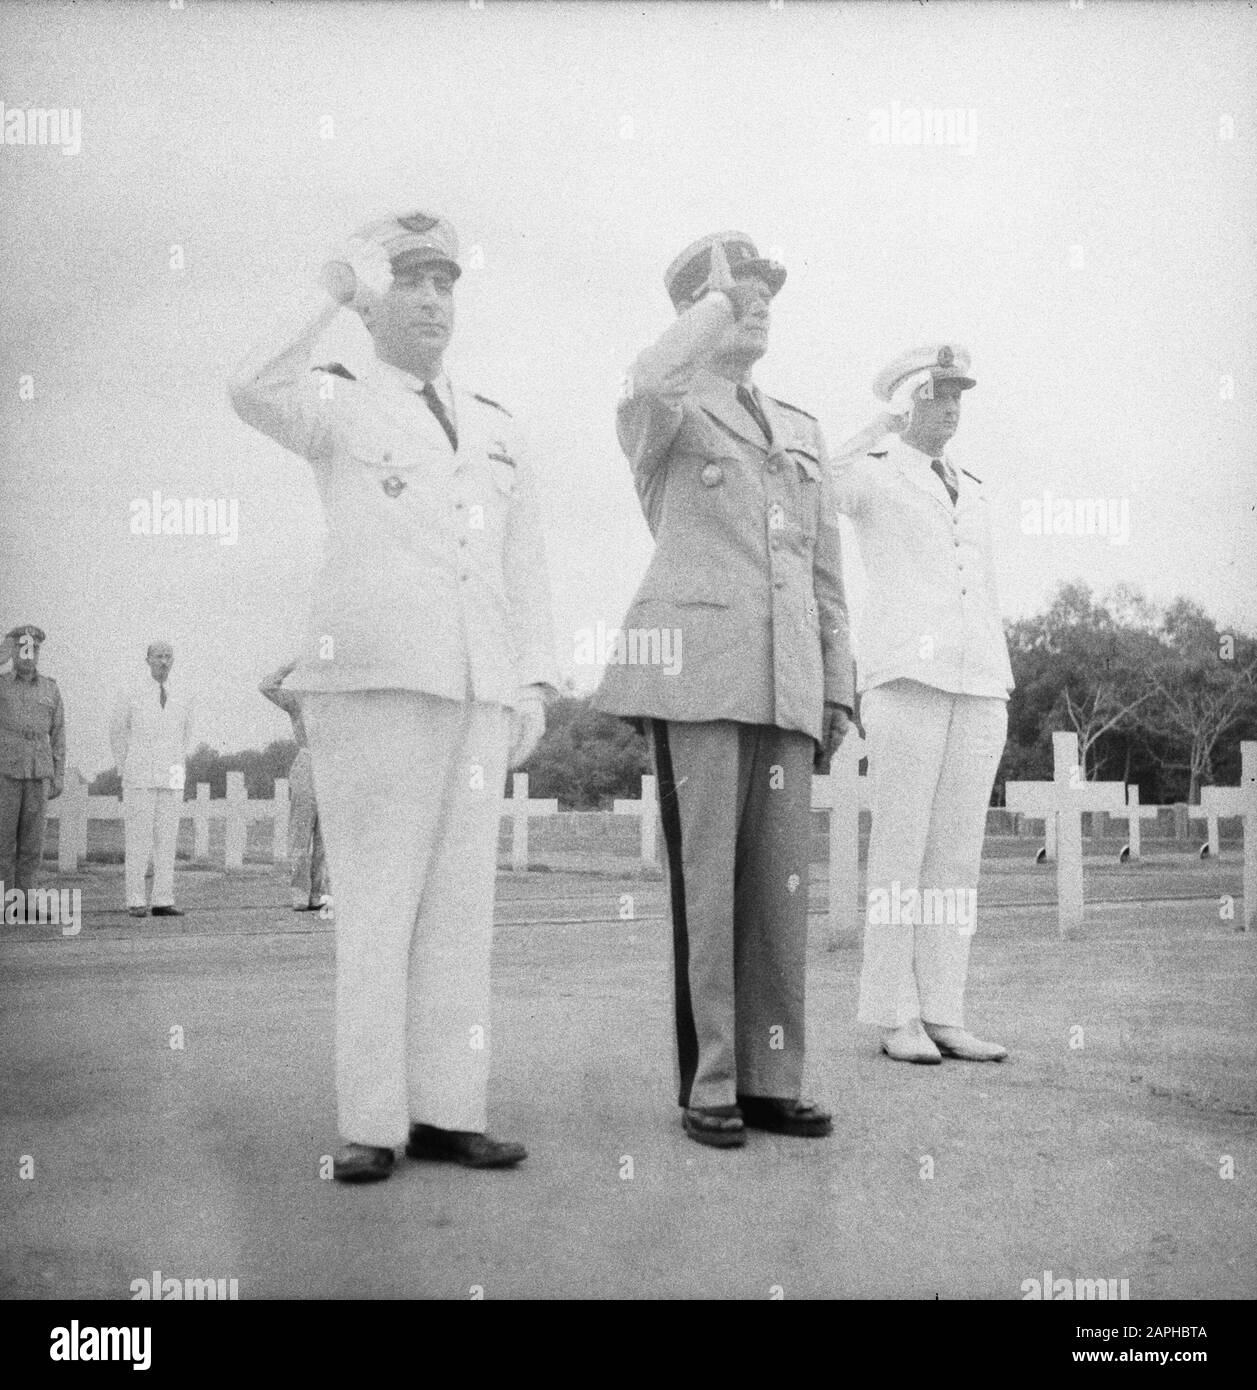 Wreath Legging Honorary Antjol by French Military Mission Description: The  French Deputy Consul in Batavia, Mr. C. Alby and col. V. Morizon, lt. col.  P. Faure and cap. the corvette C. Gerard